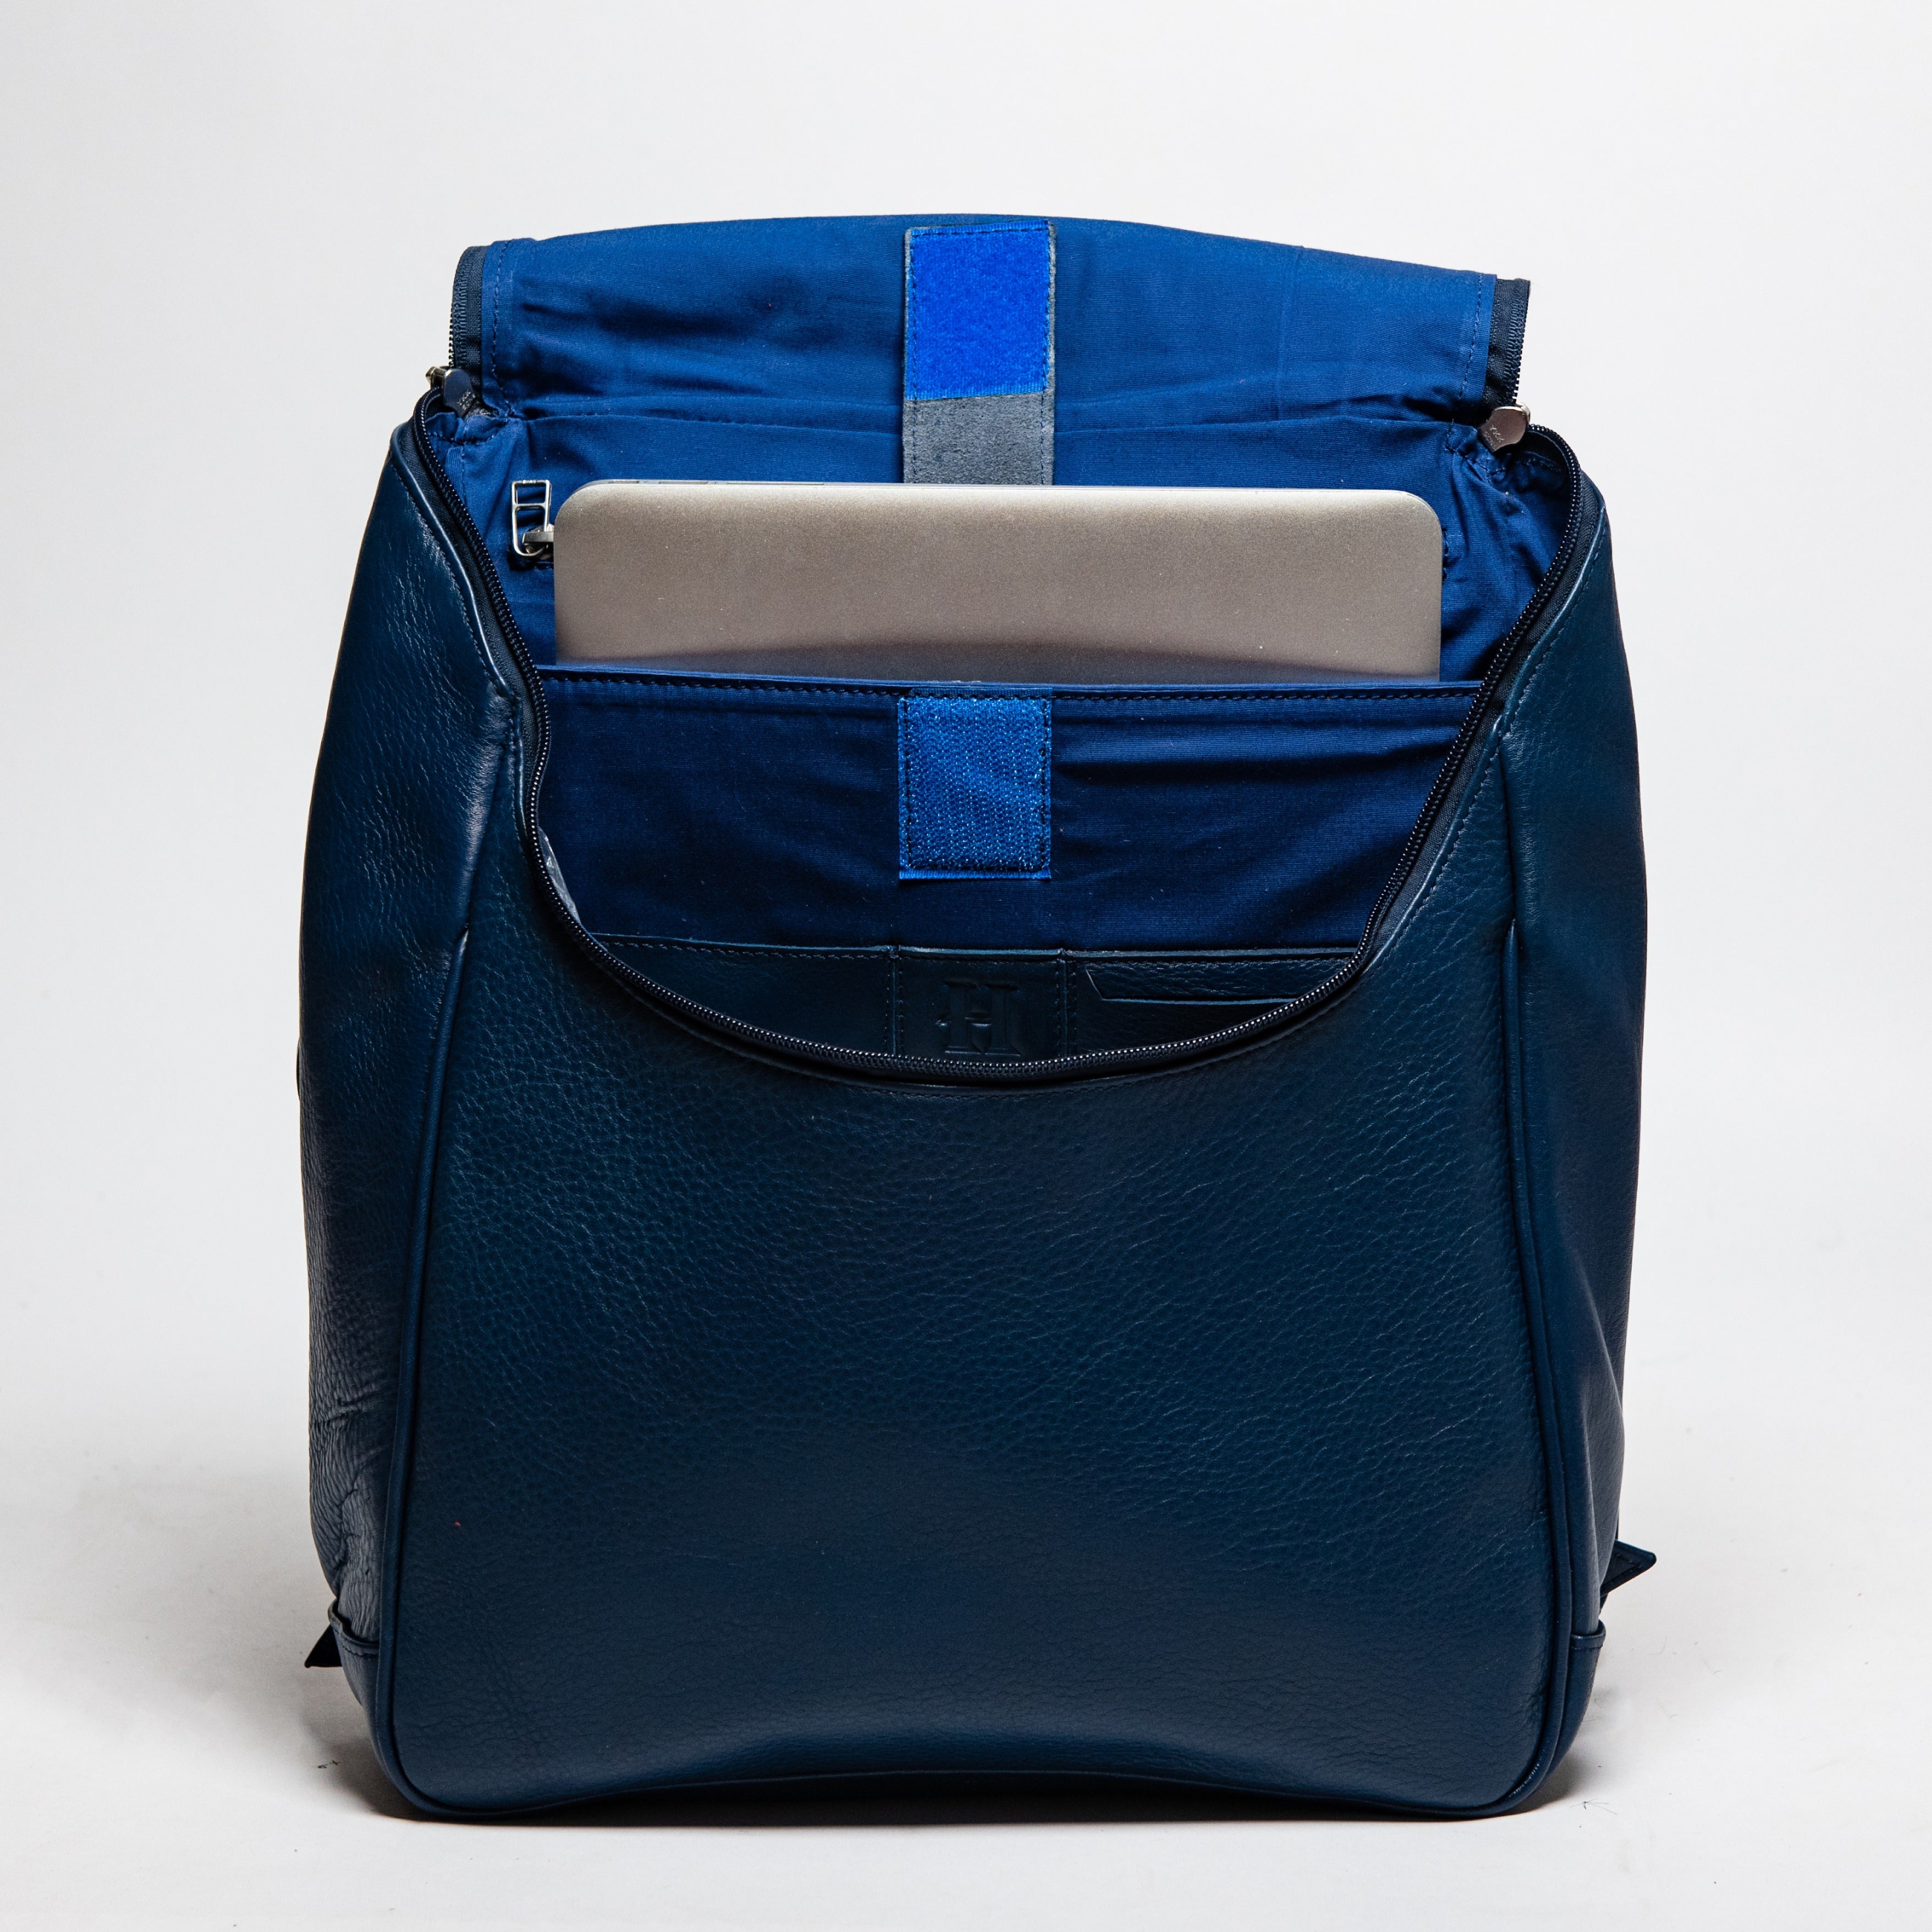 Student Leather Backpack - Blue